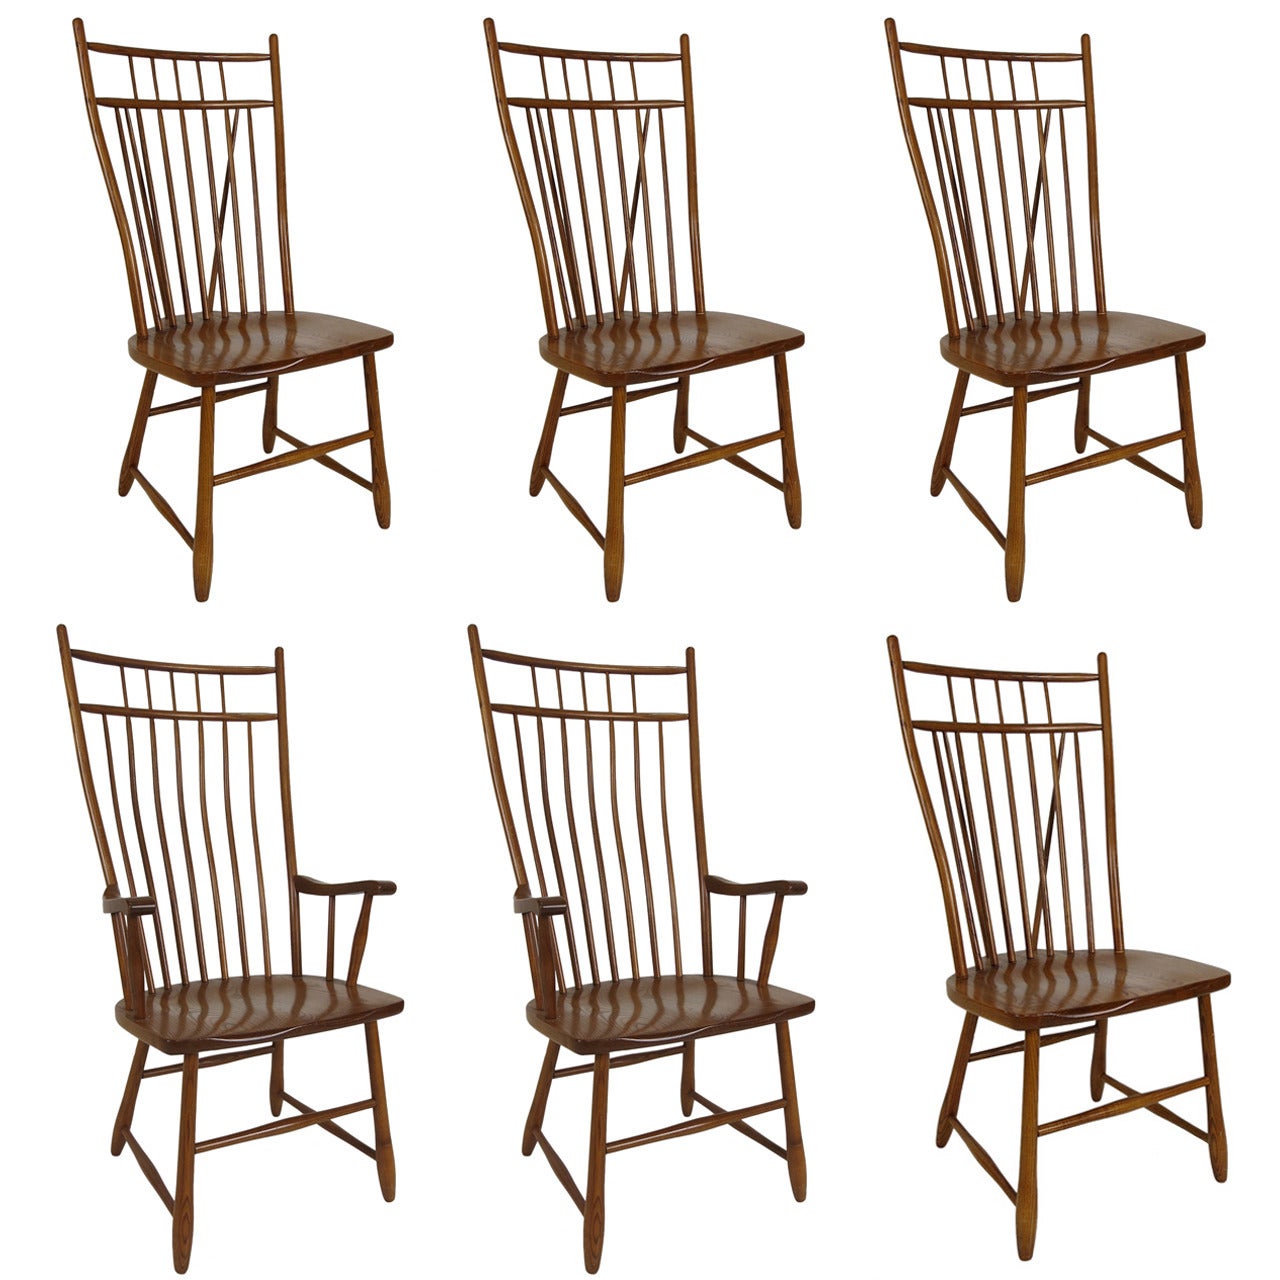 Set of Six High-Back, Windsor Style Dining Chairs